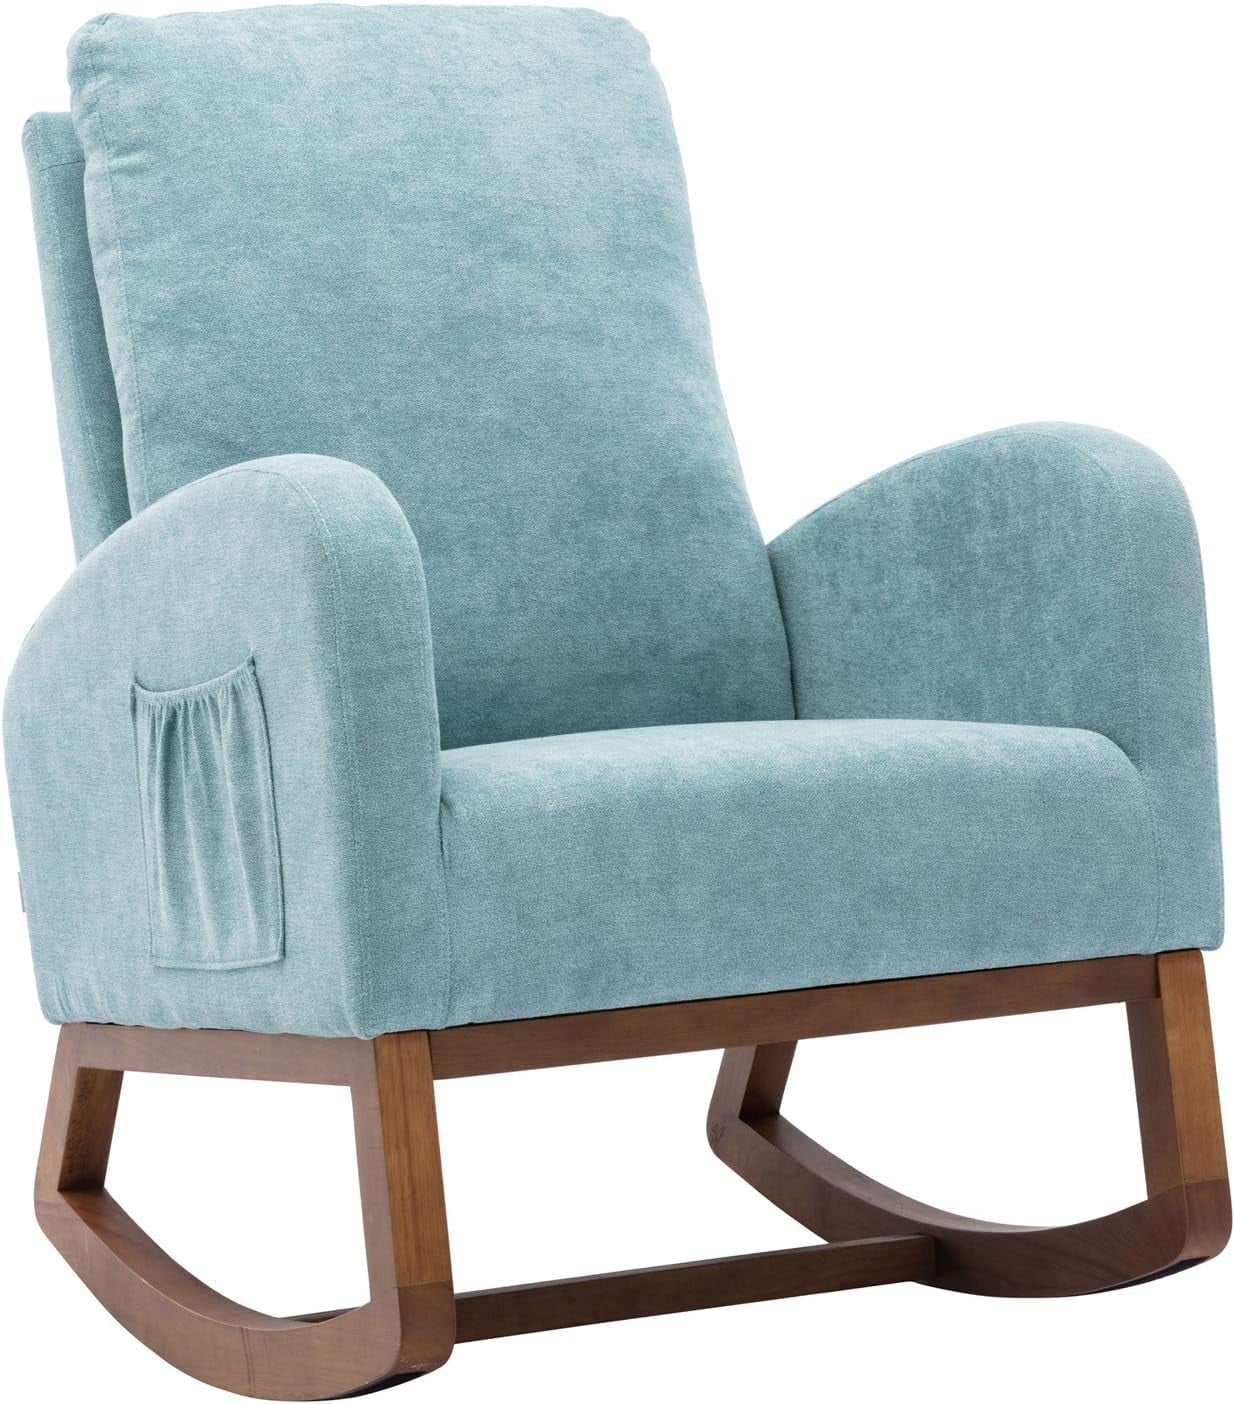 The 11 Best Nursery Rocking Chairs and Gliders of 2023